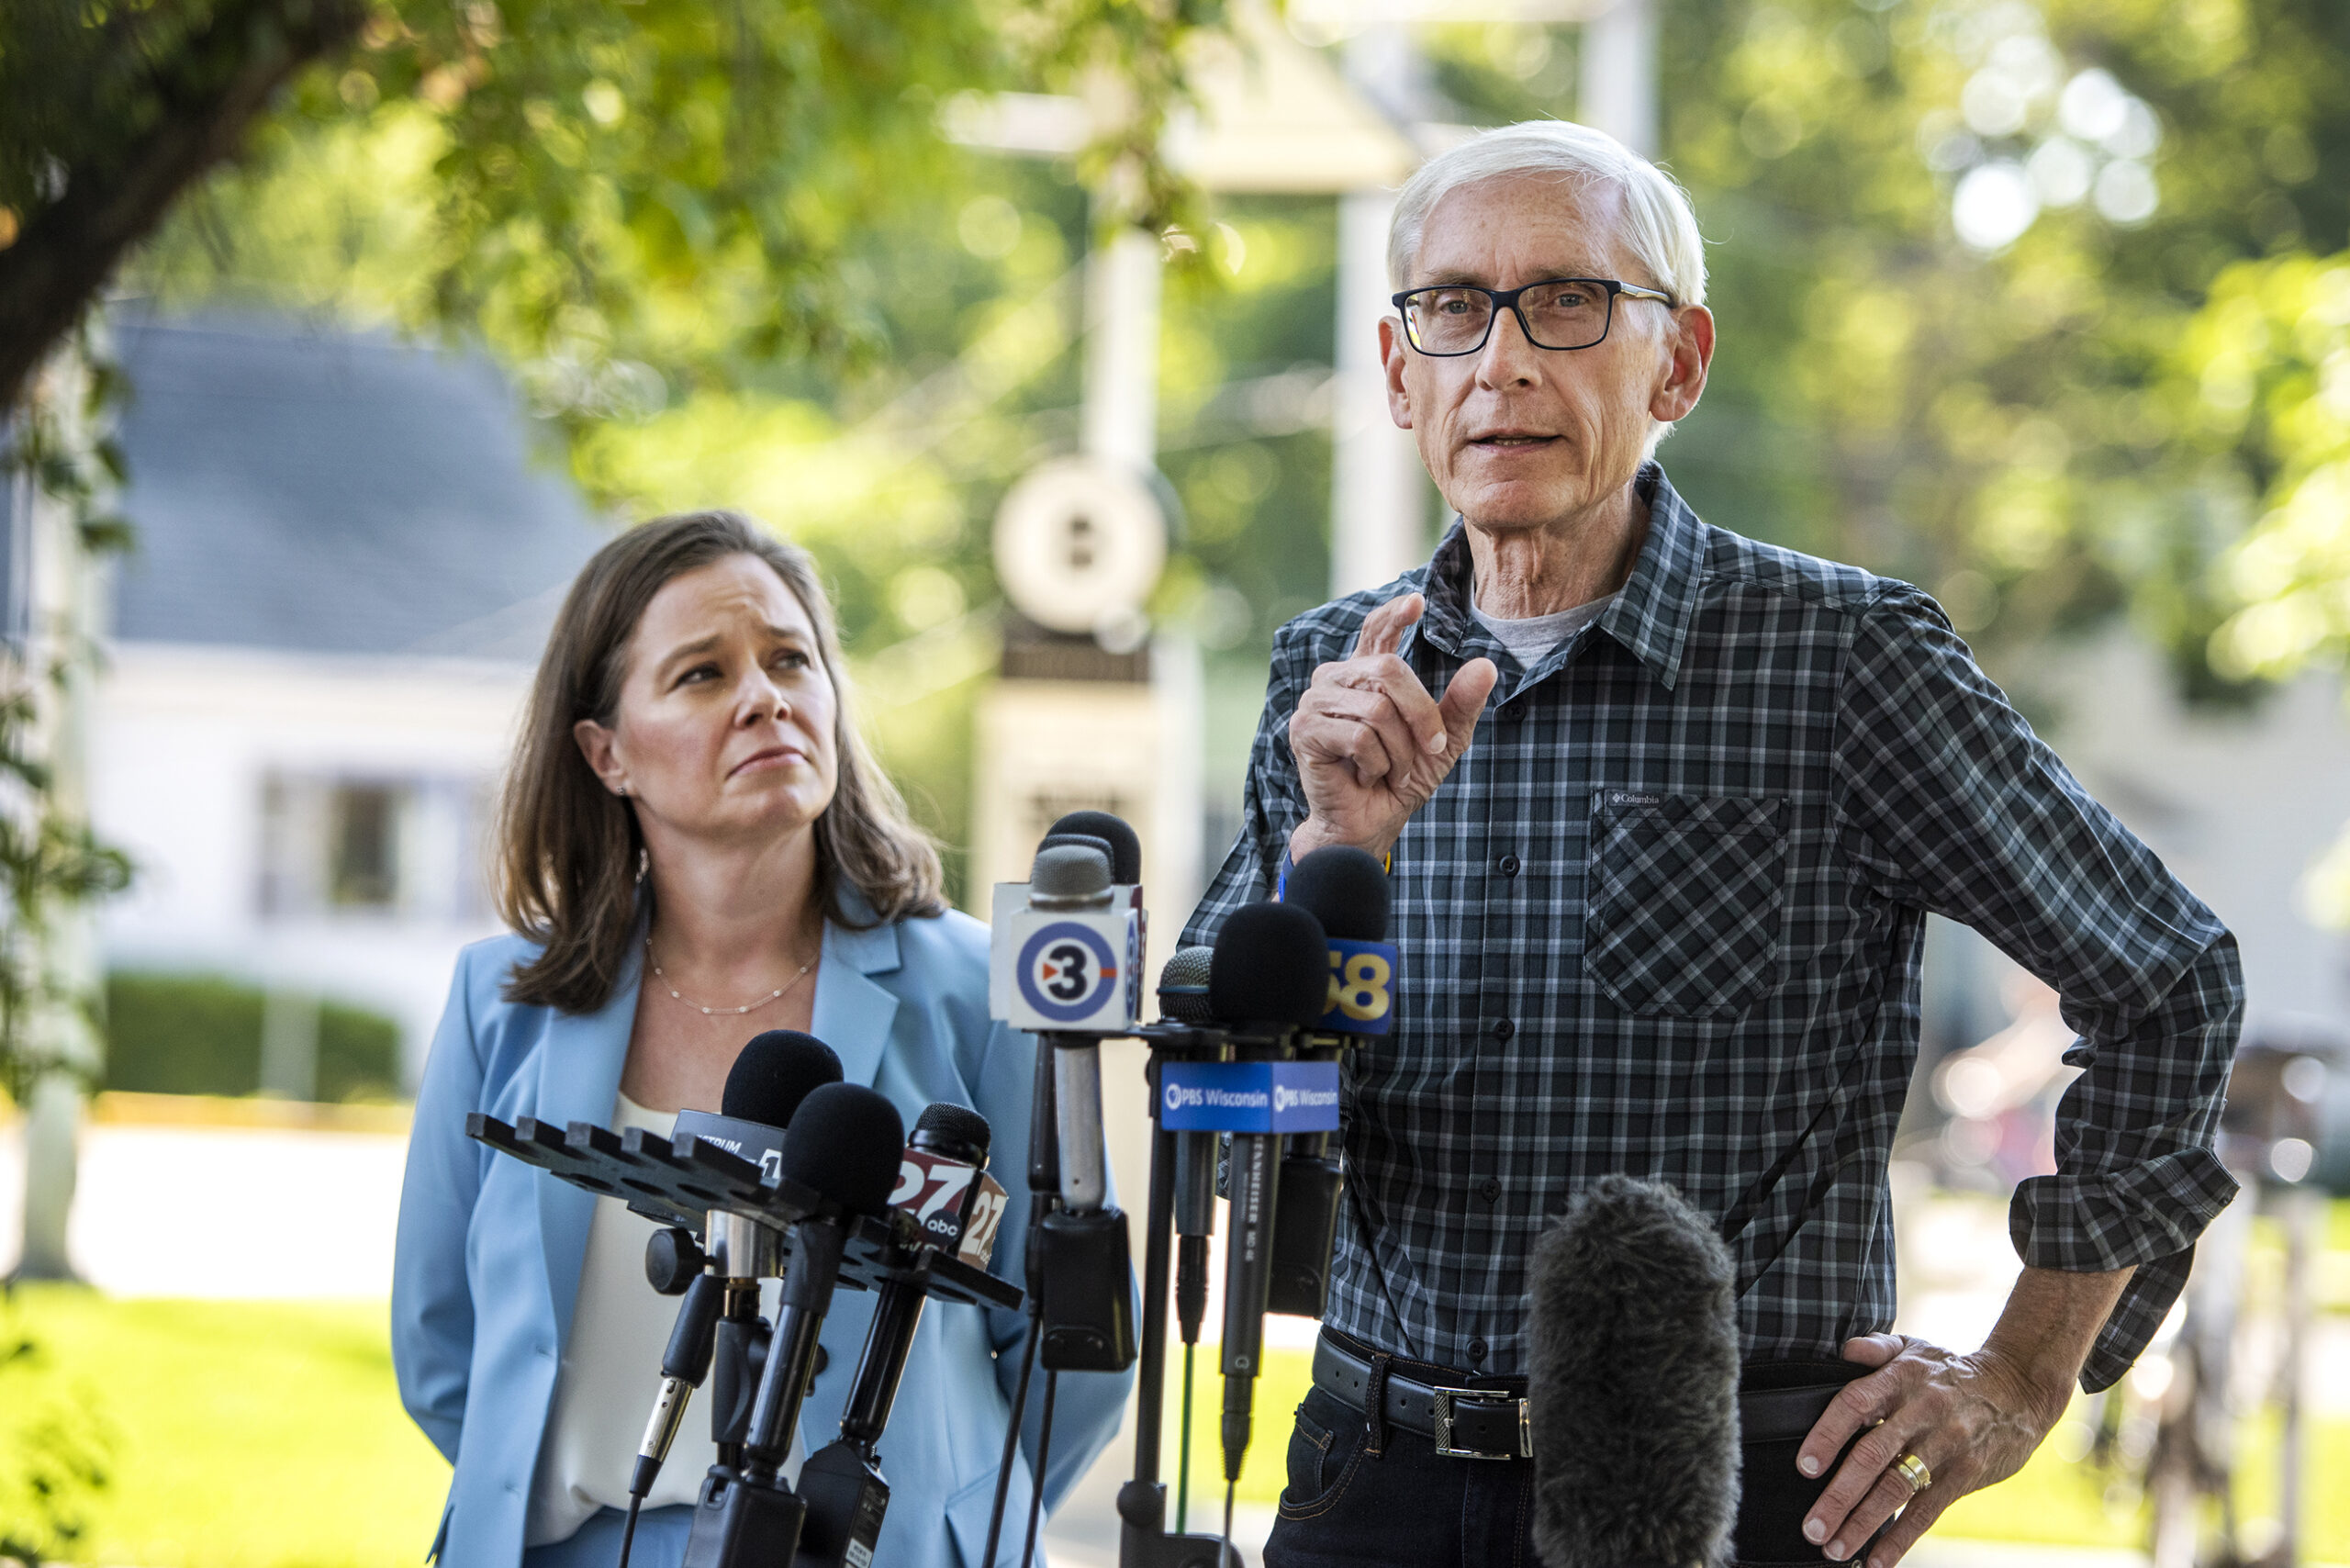 Evers says Michels ‘owns’ Trump support as governor’s race pivots toward general election